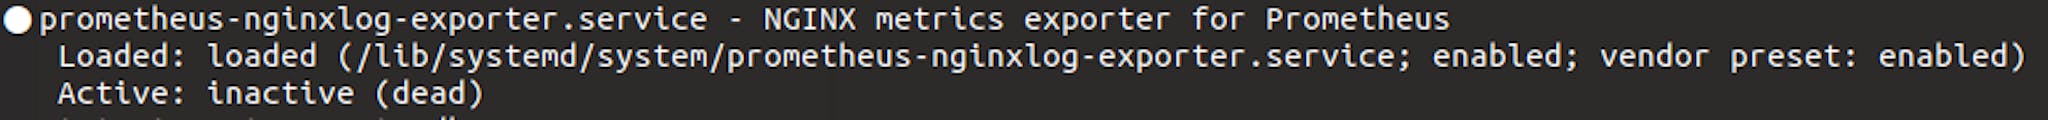 output of "systemctl status prometheus-nginxlog-exporter" if service didn't started